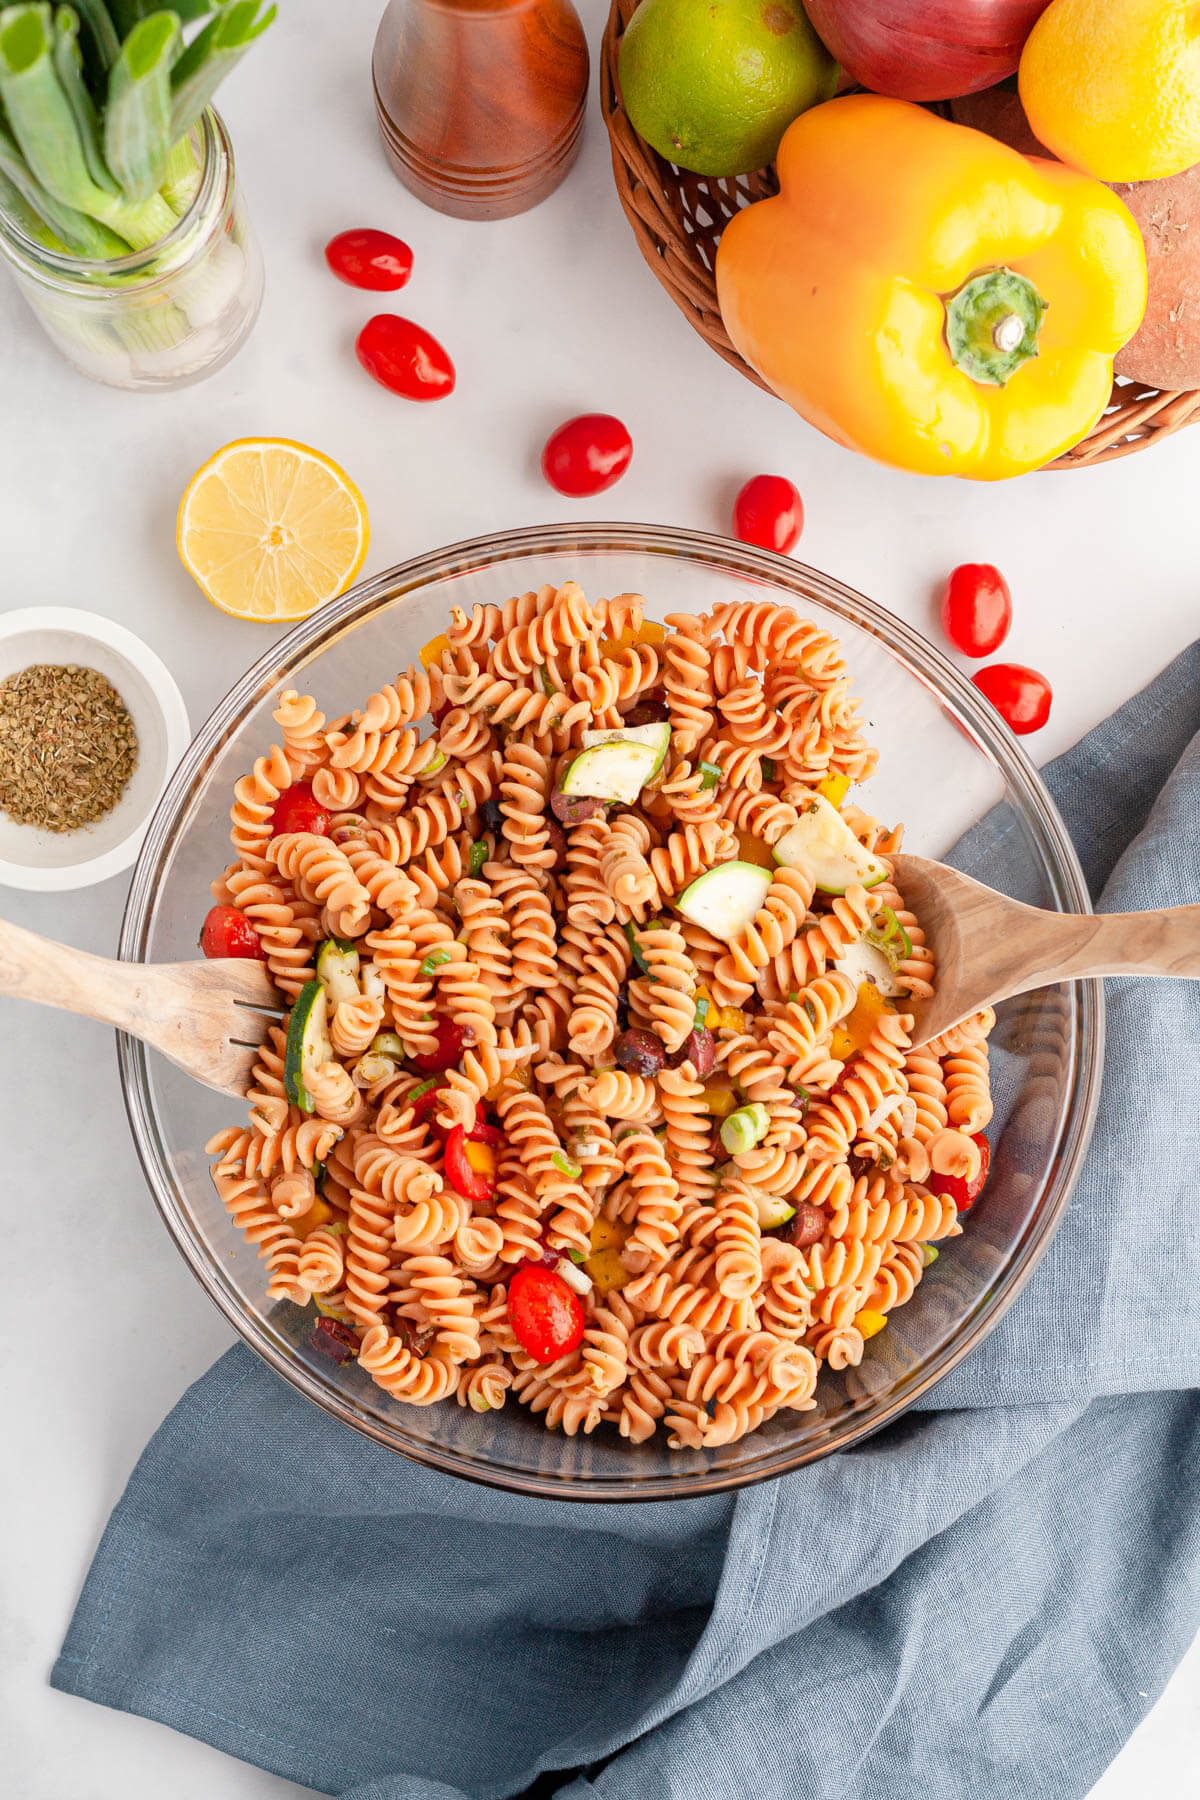 vertical image of red lentil pasta salad in bowl with wooden utensils to toss